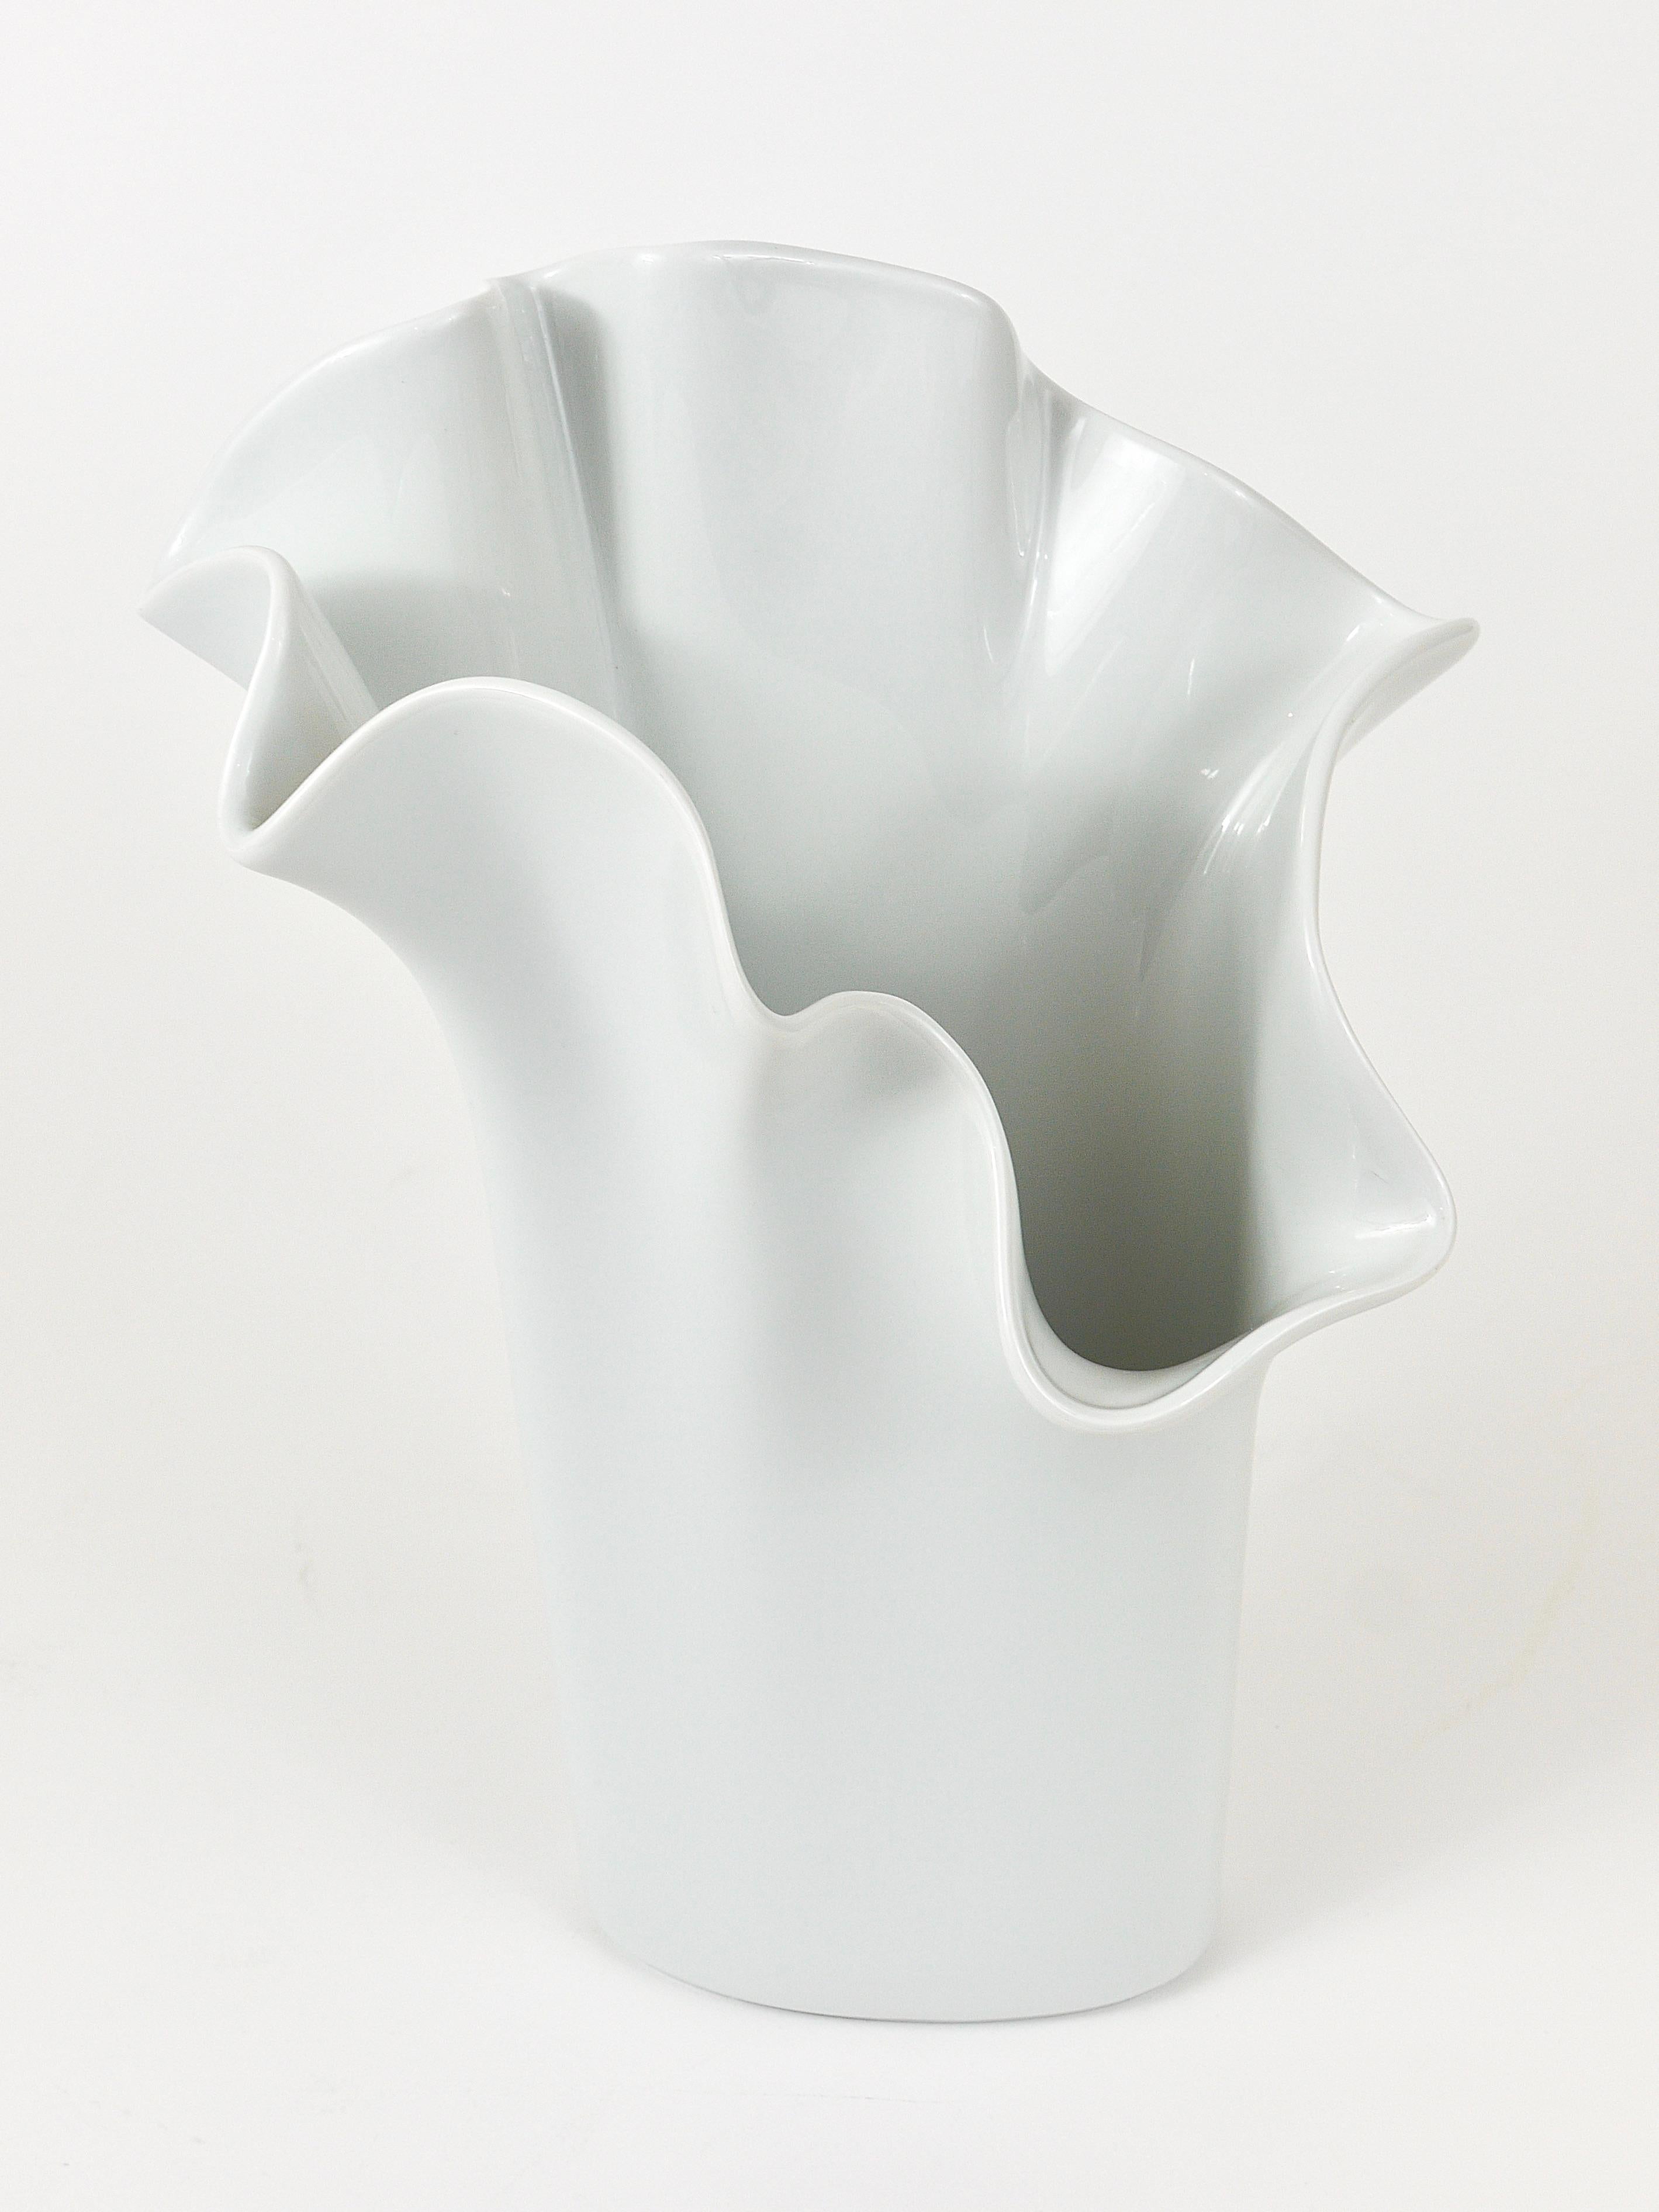 Rosenthal Studio-line Fazzoletto Asym Vase by Claus Josef Riedel, Germany, 1970s 7